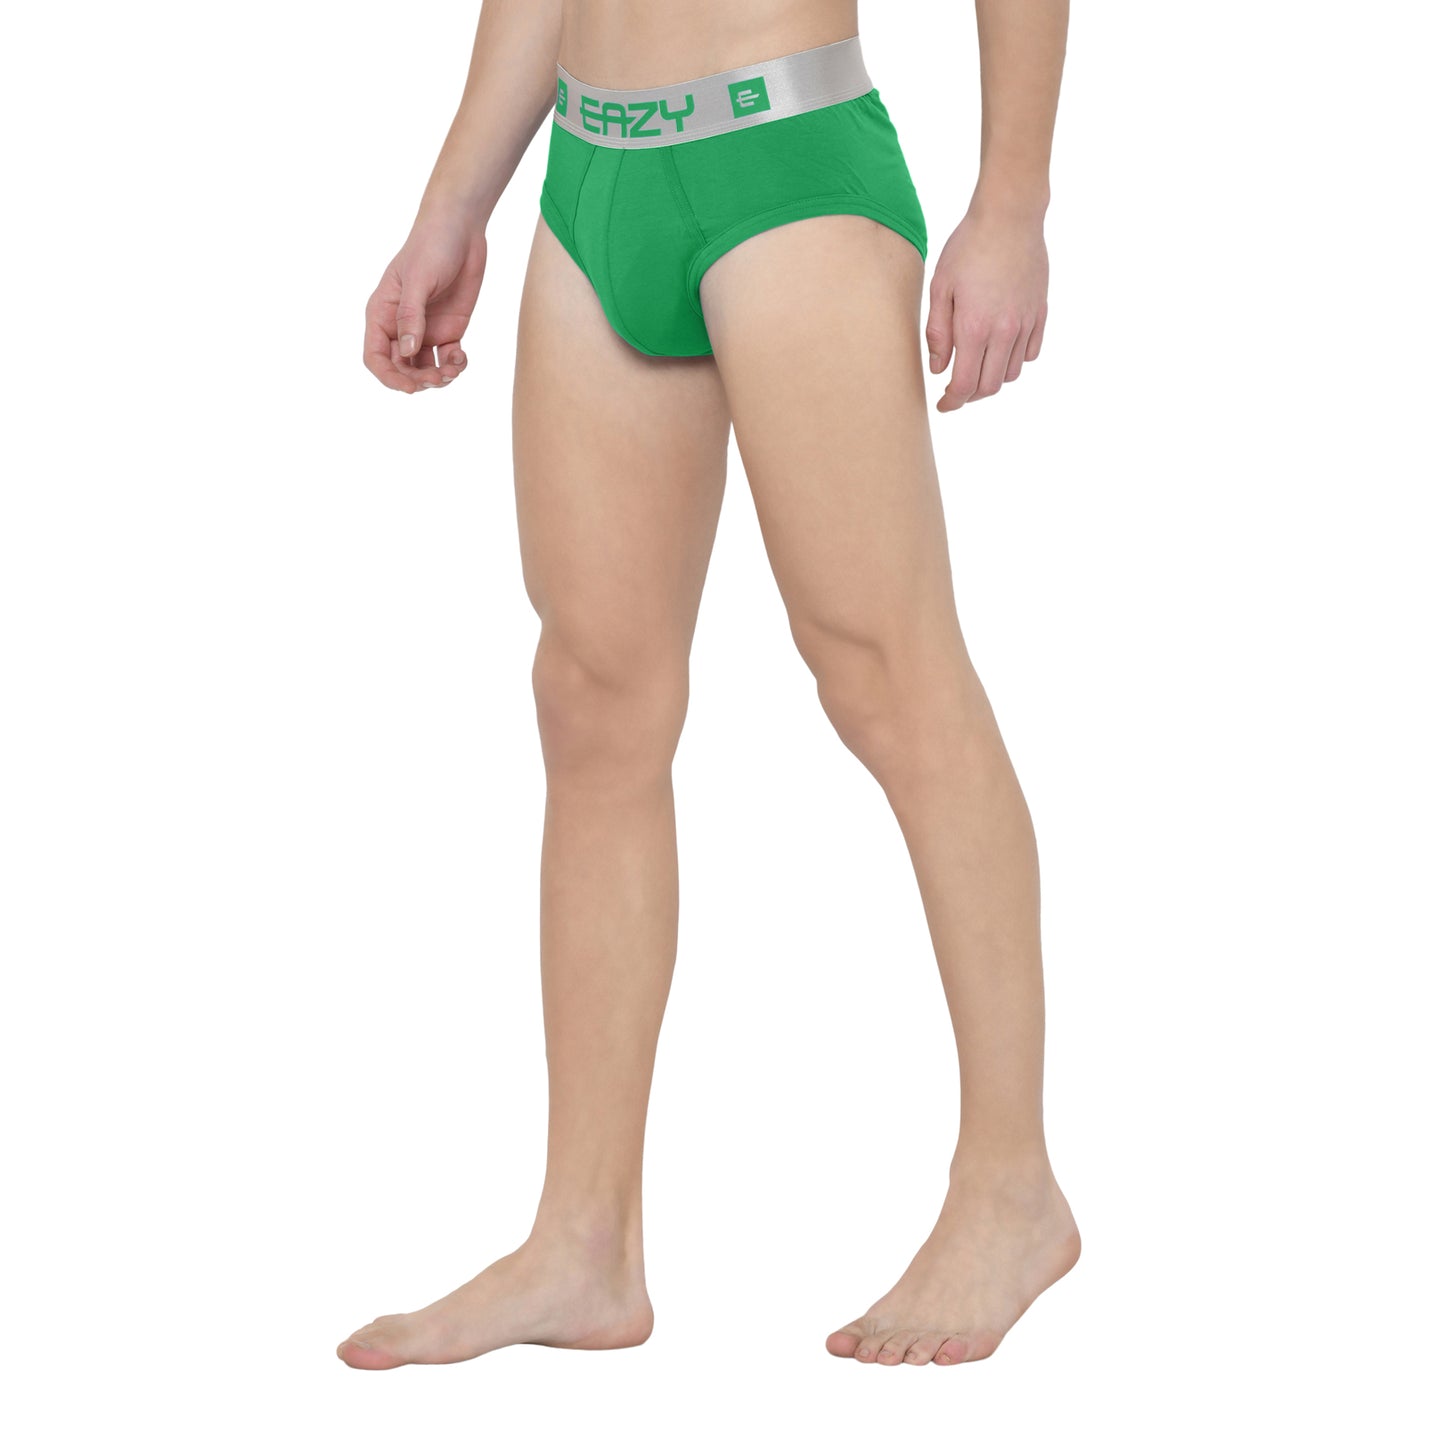 Eazy Silverline Low Rise Brief (Pack of 3)